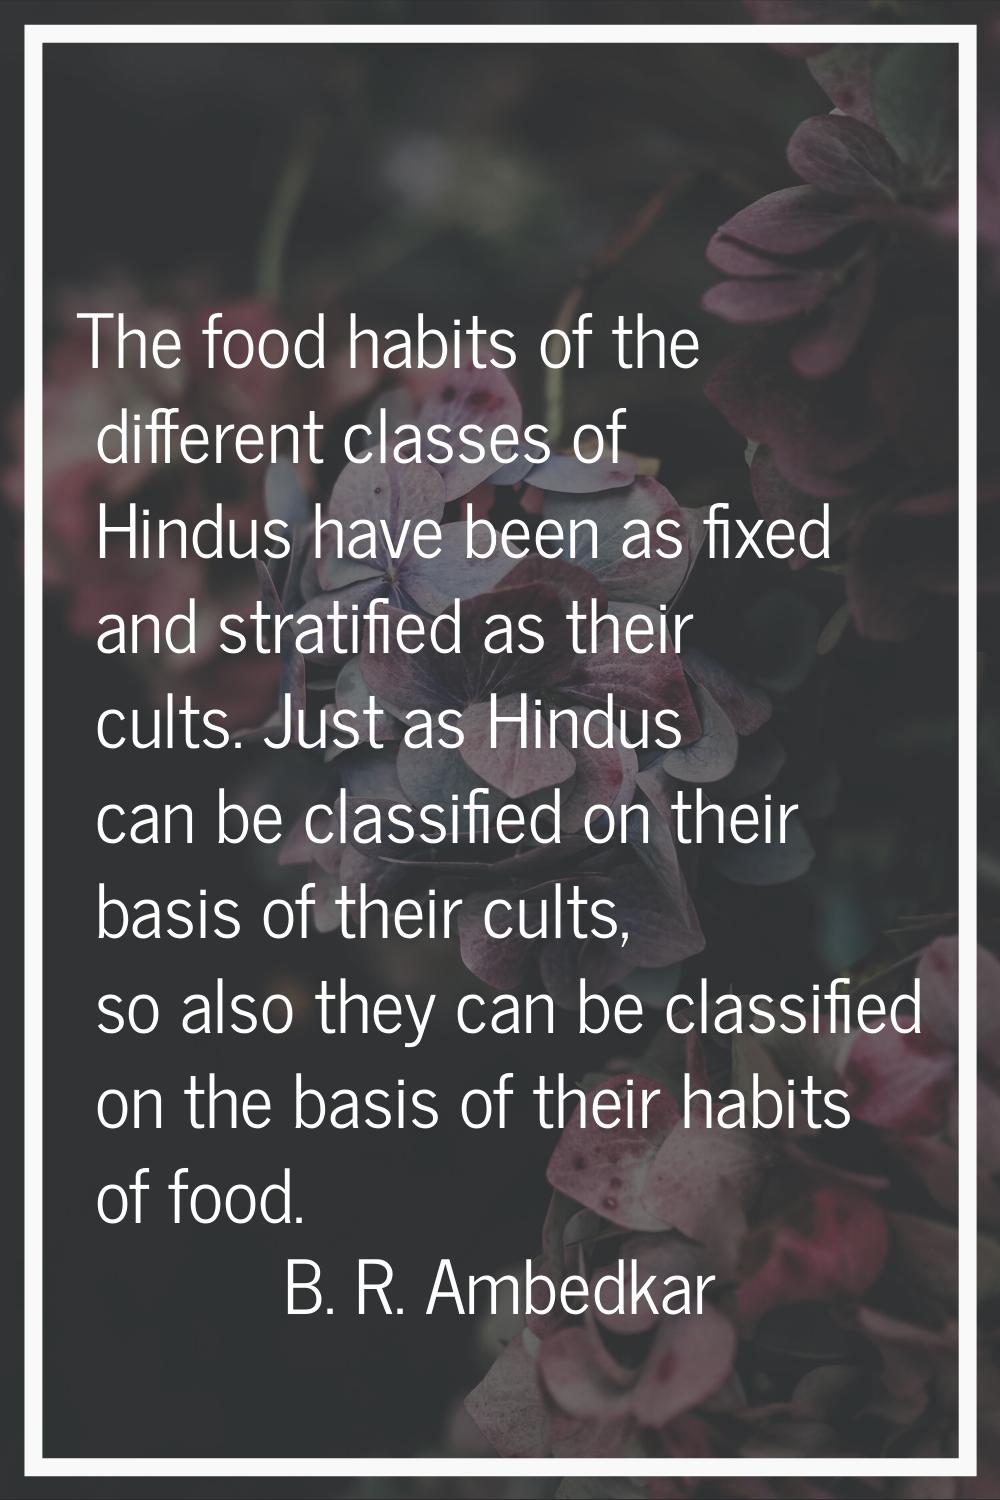 The food habits of the different classes of Hindus have been as fixed and stratified as their cults